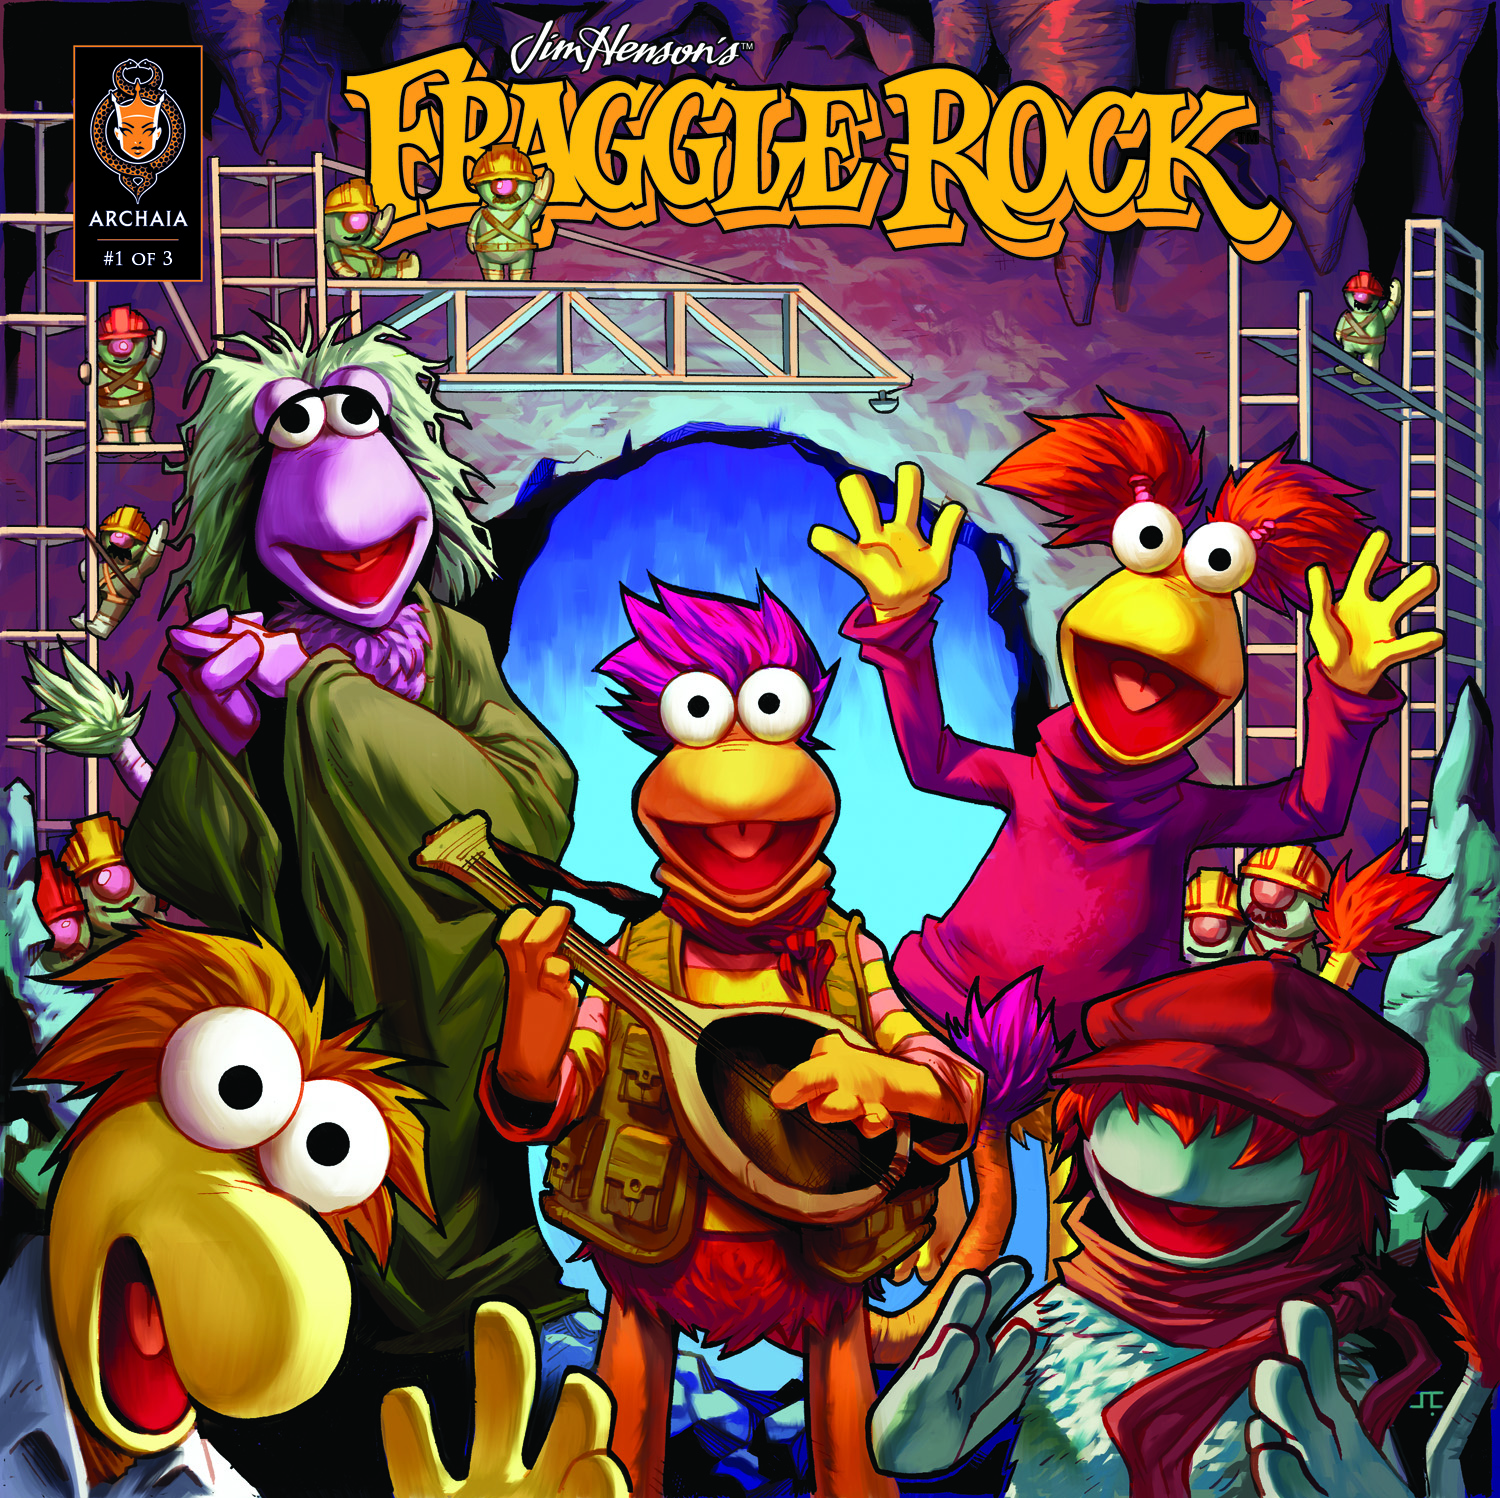 https://www.entertainmentfuse.com/images/Fraggle_Rock_01_CoverA2.jpg